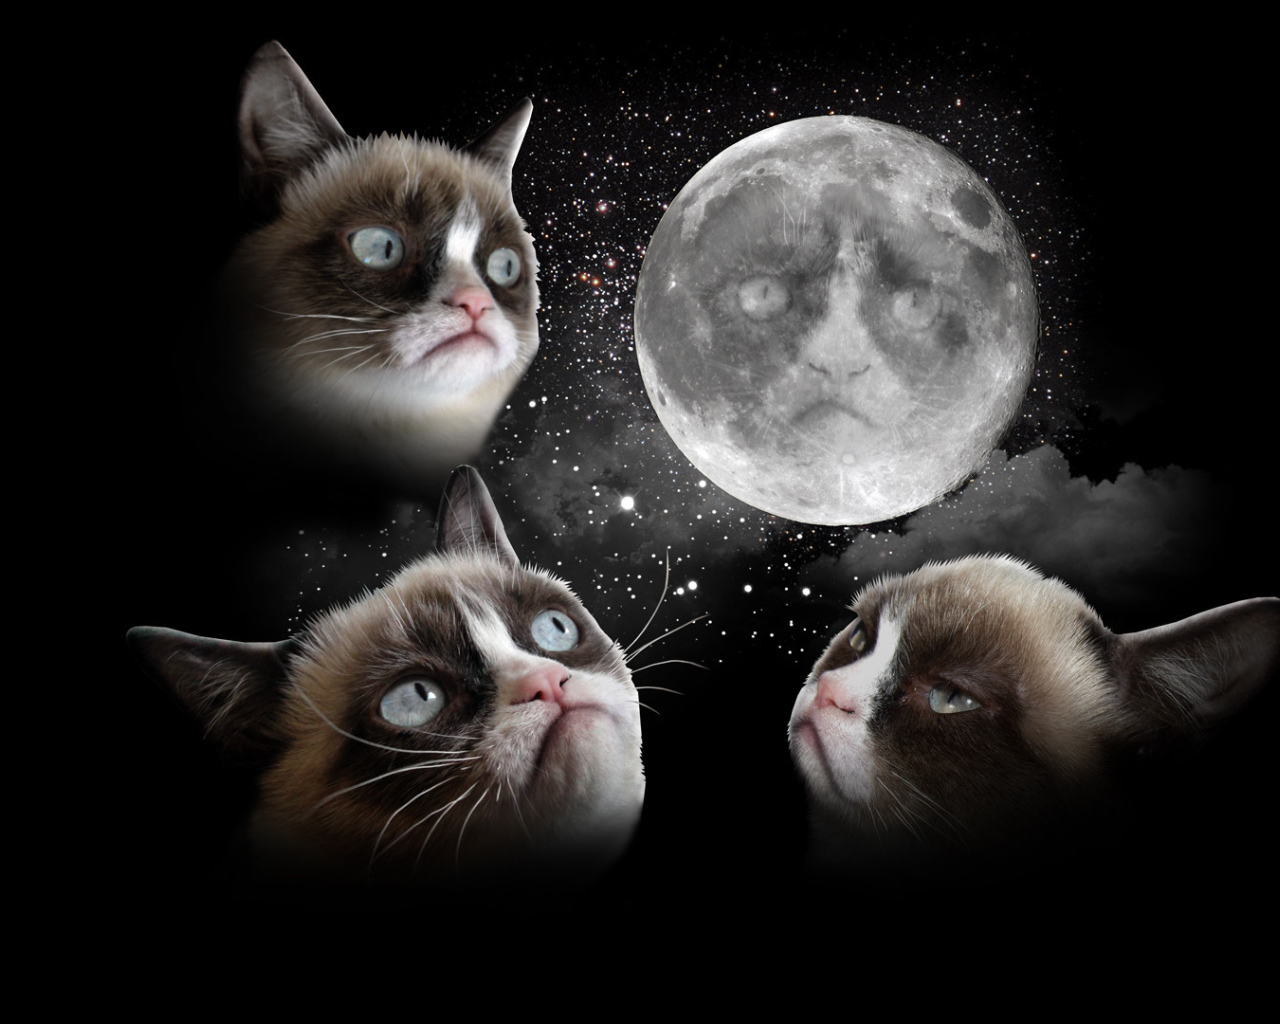 Drumpy cat and the moon